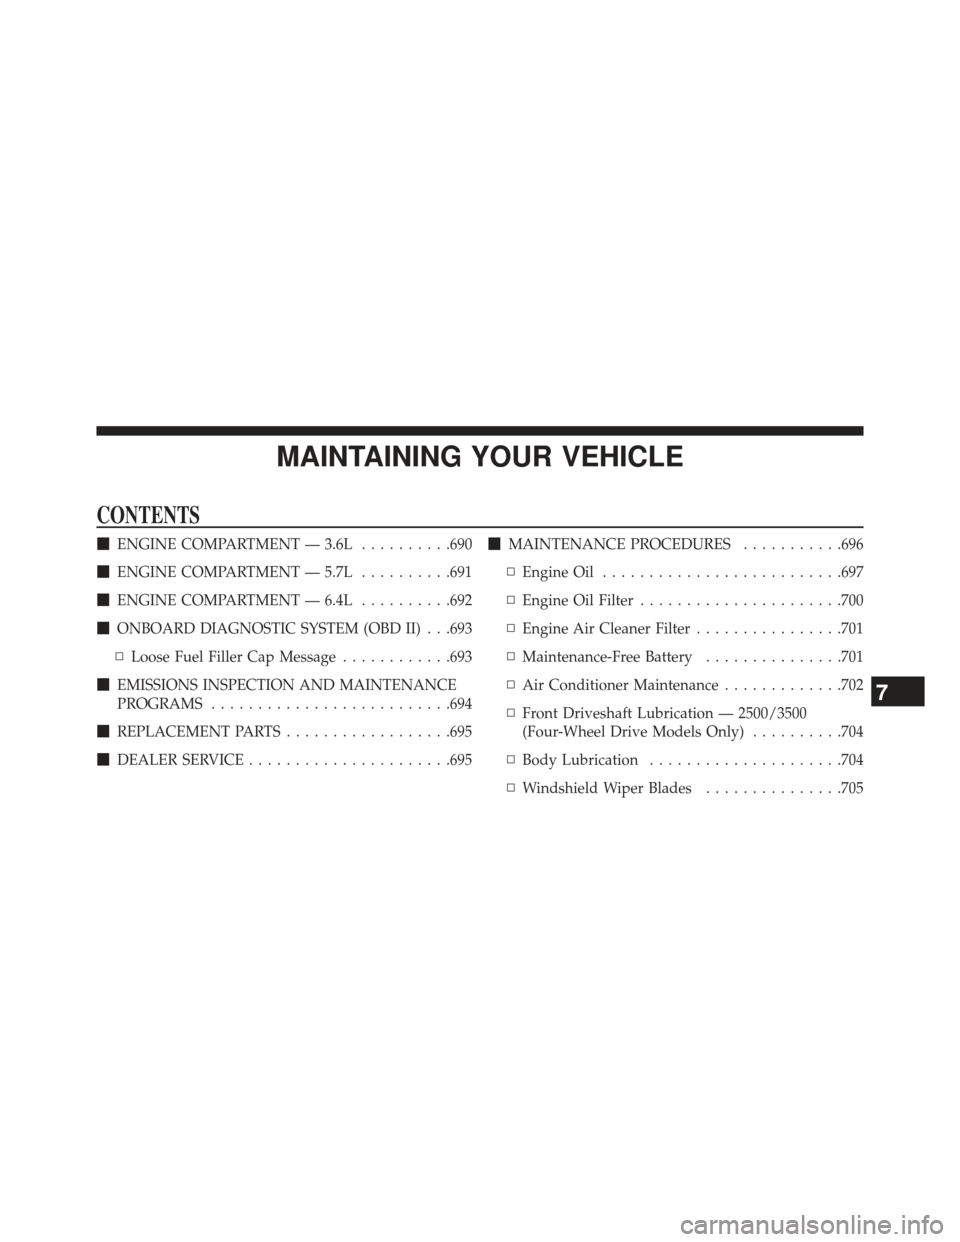 Ram 1500 2014 User Guide MAINTAINING YOUR VEHICLE
CONTENTS
ENGINE COMPARTMENT — 3.6L ..........690
 ENGINE COMPARTMENT — 5.7L ..........691
 ENGINE COMPARTMENT — 6.4L ..........692
 ONBOARD DIAGNOSTIC SYSTEM (OBD II